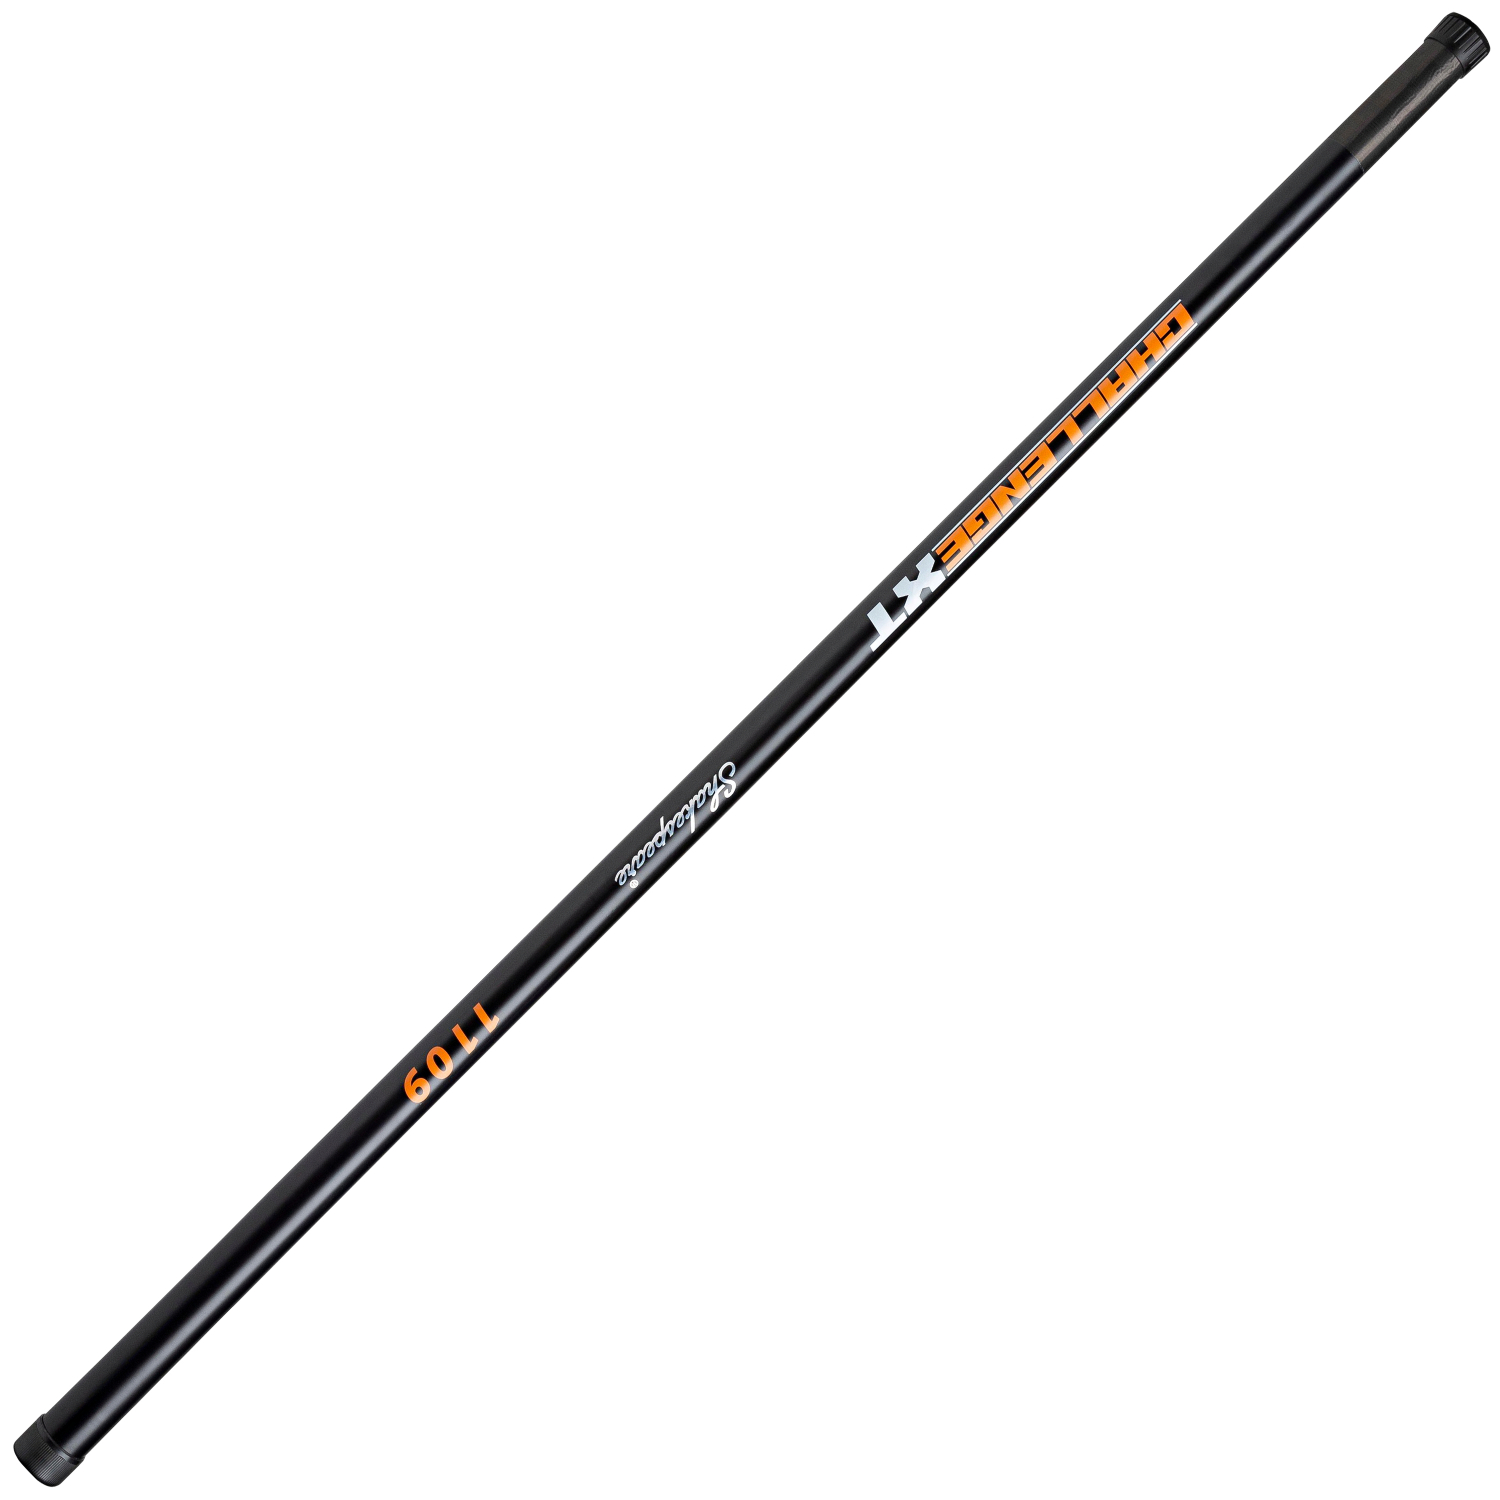 Shakespeare Challenge XT Pole at low prices